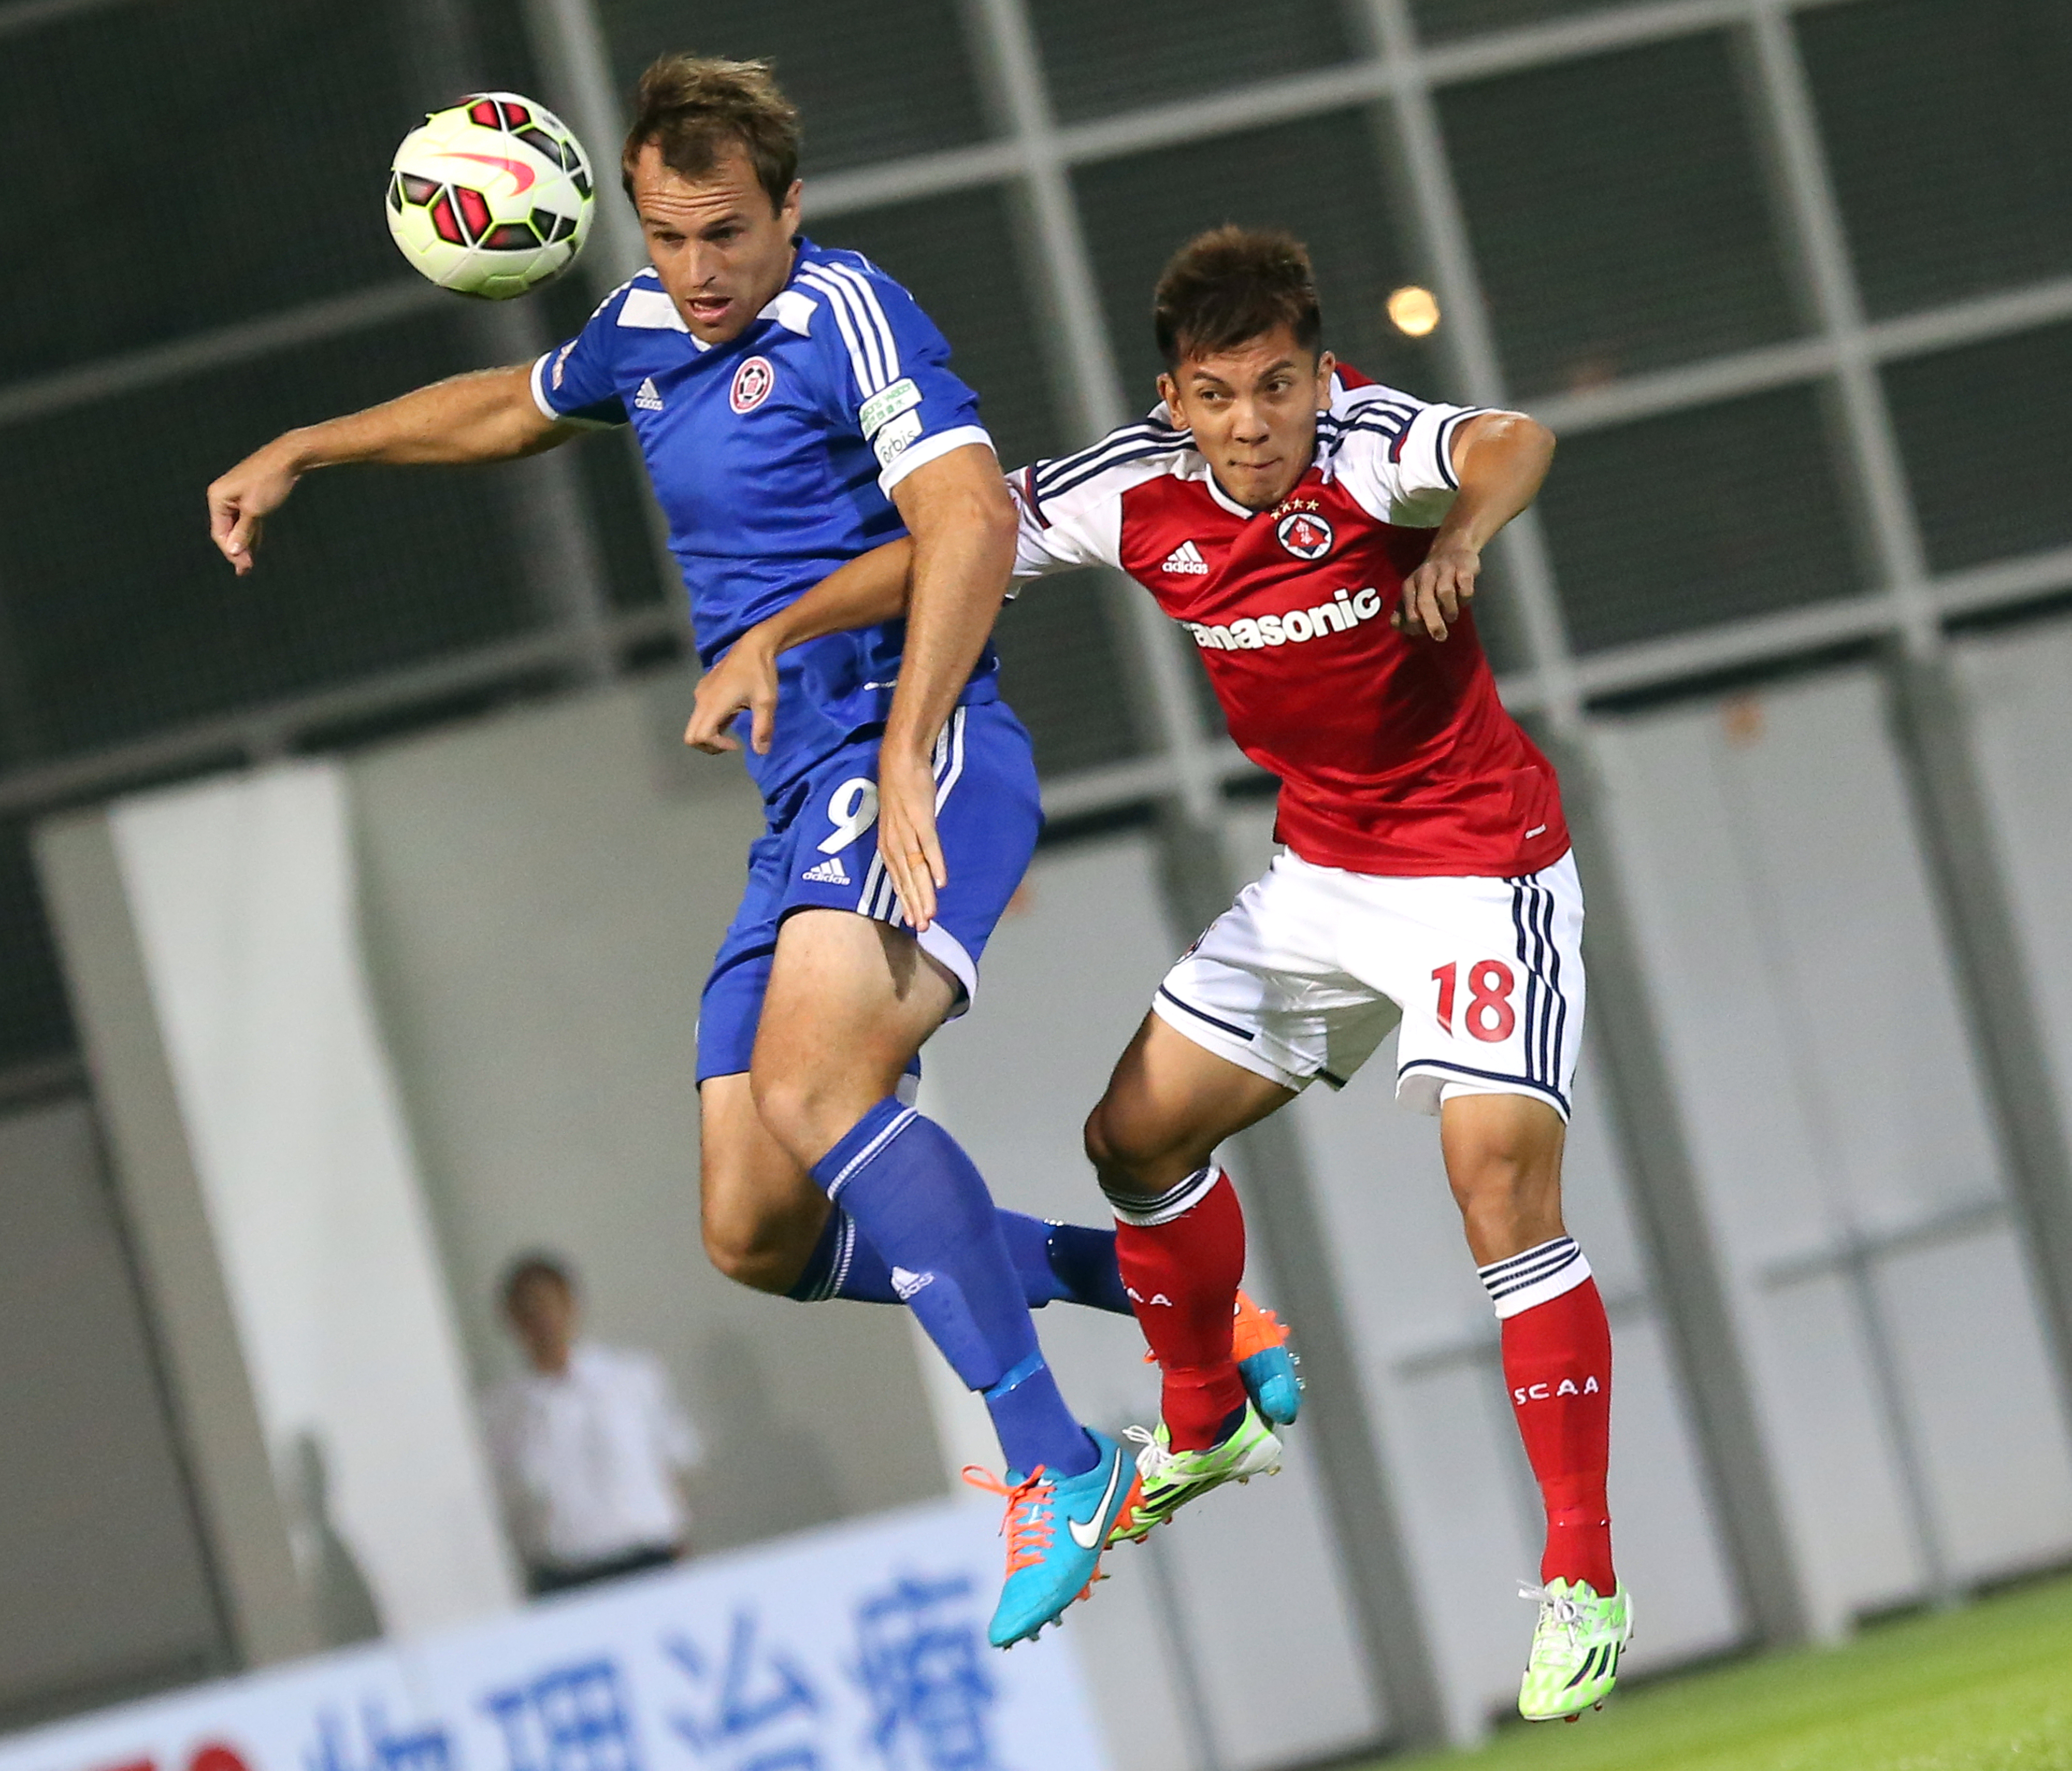 Eastern's Dylan Macallister (in blue) and South China's Kwok Kin-pong go for a header in a Hong Kong Premier League match at Mong Kok Stadium. Photo: Nora Tam